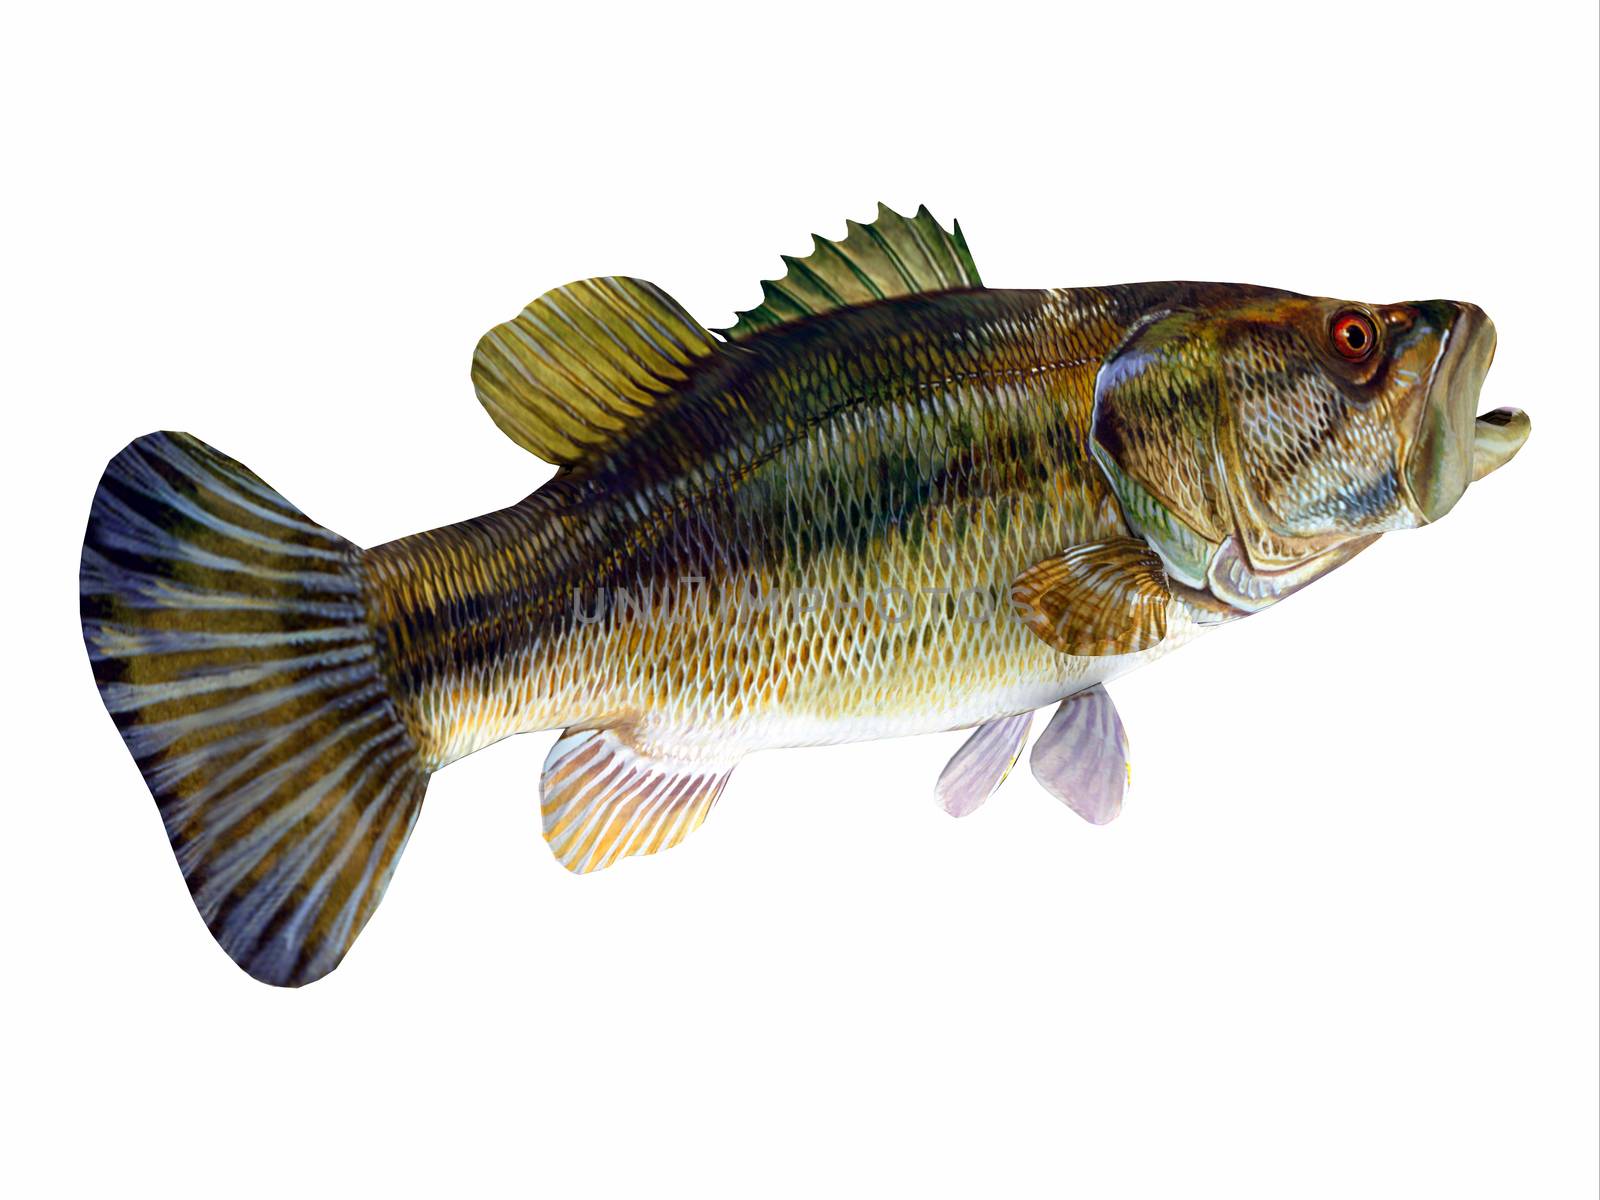 The Redeye is species of freshwater bass fish found in lakes, rivers and streams of Georgia and Alabama, USA.